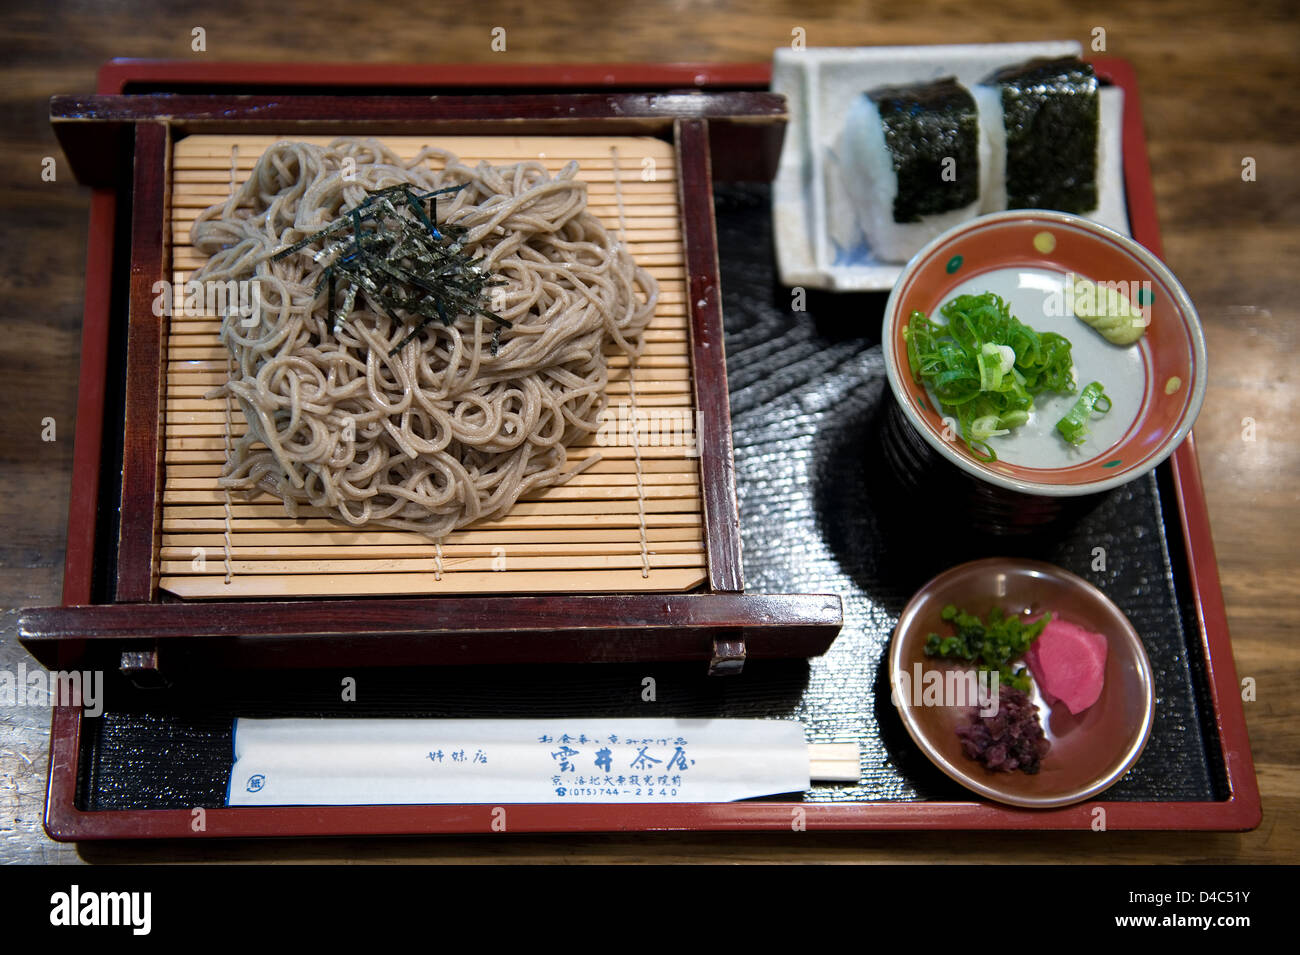 Lunch, Japanese style, includes cold soba noodles with nori, otsukemono pickles and two onigiri rice balls. Stock Photo